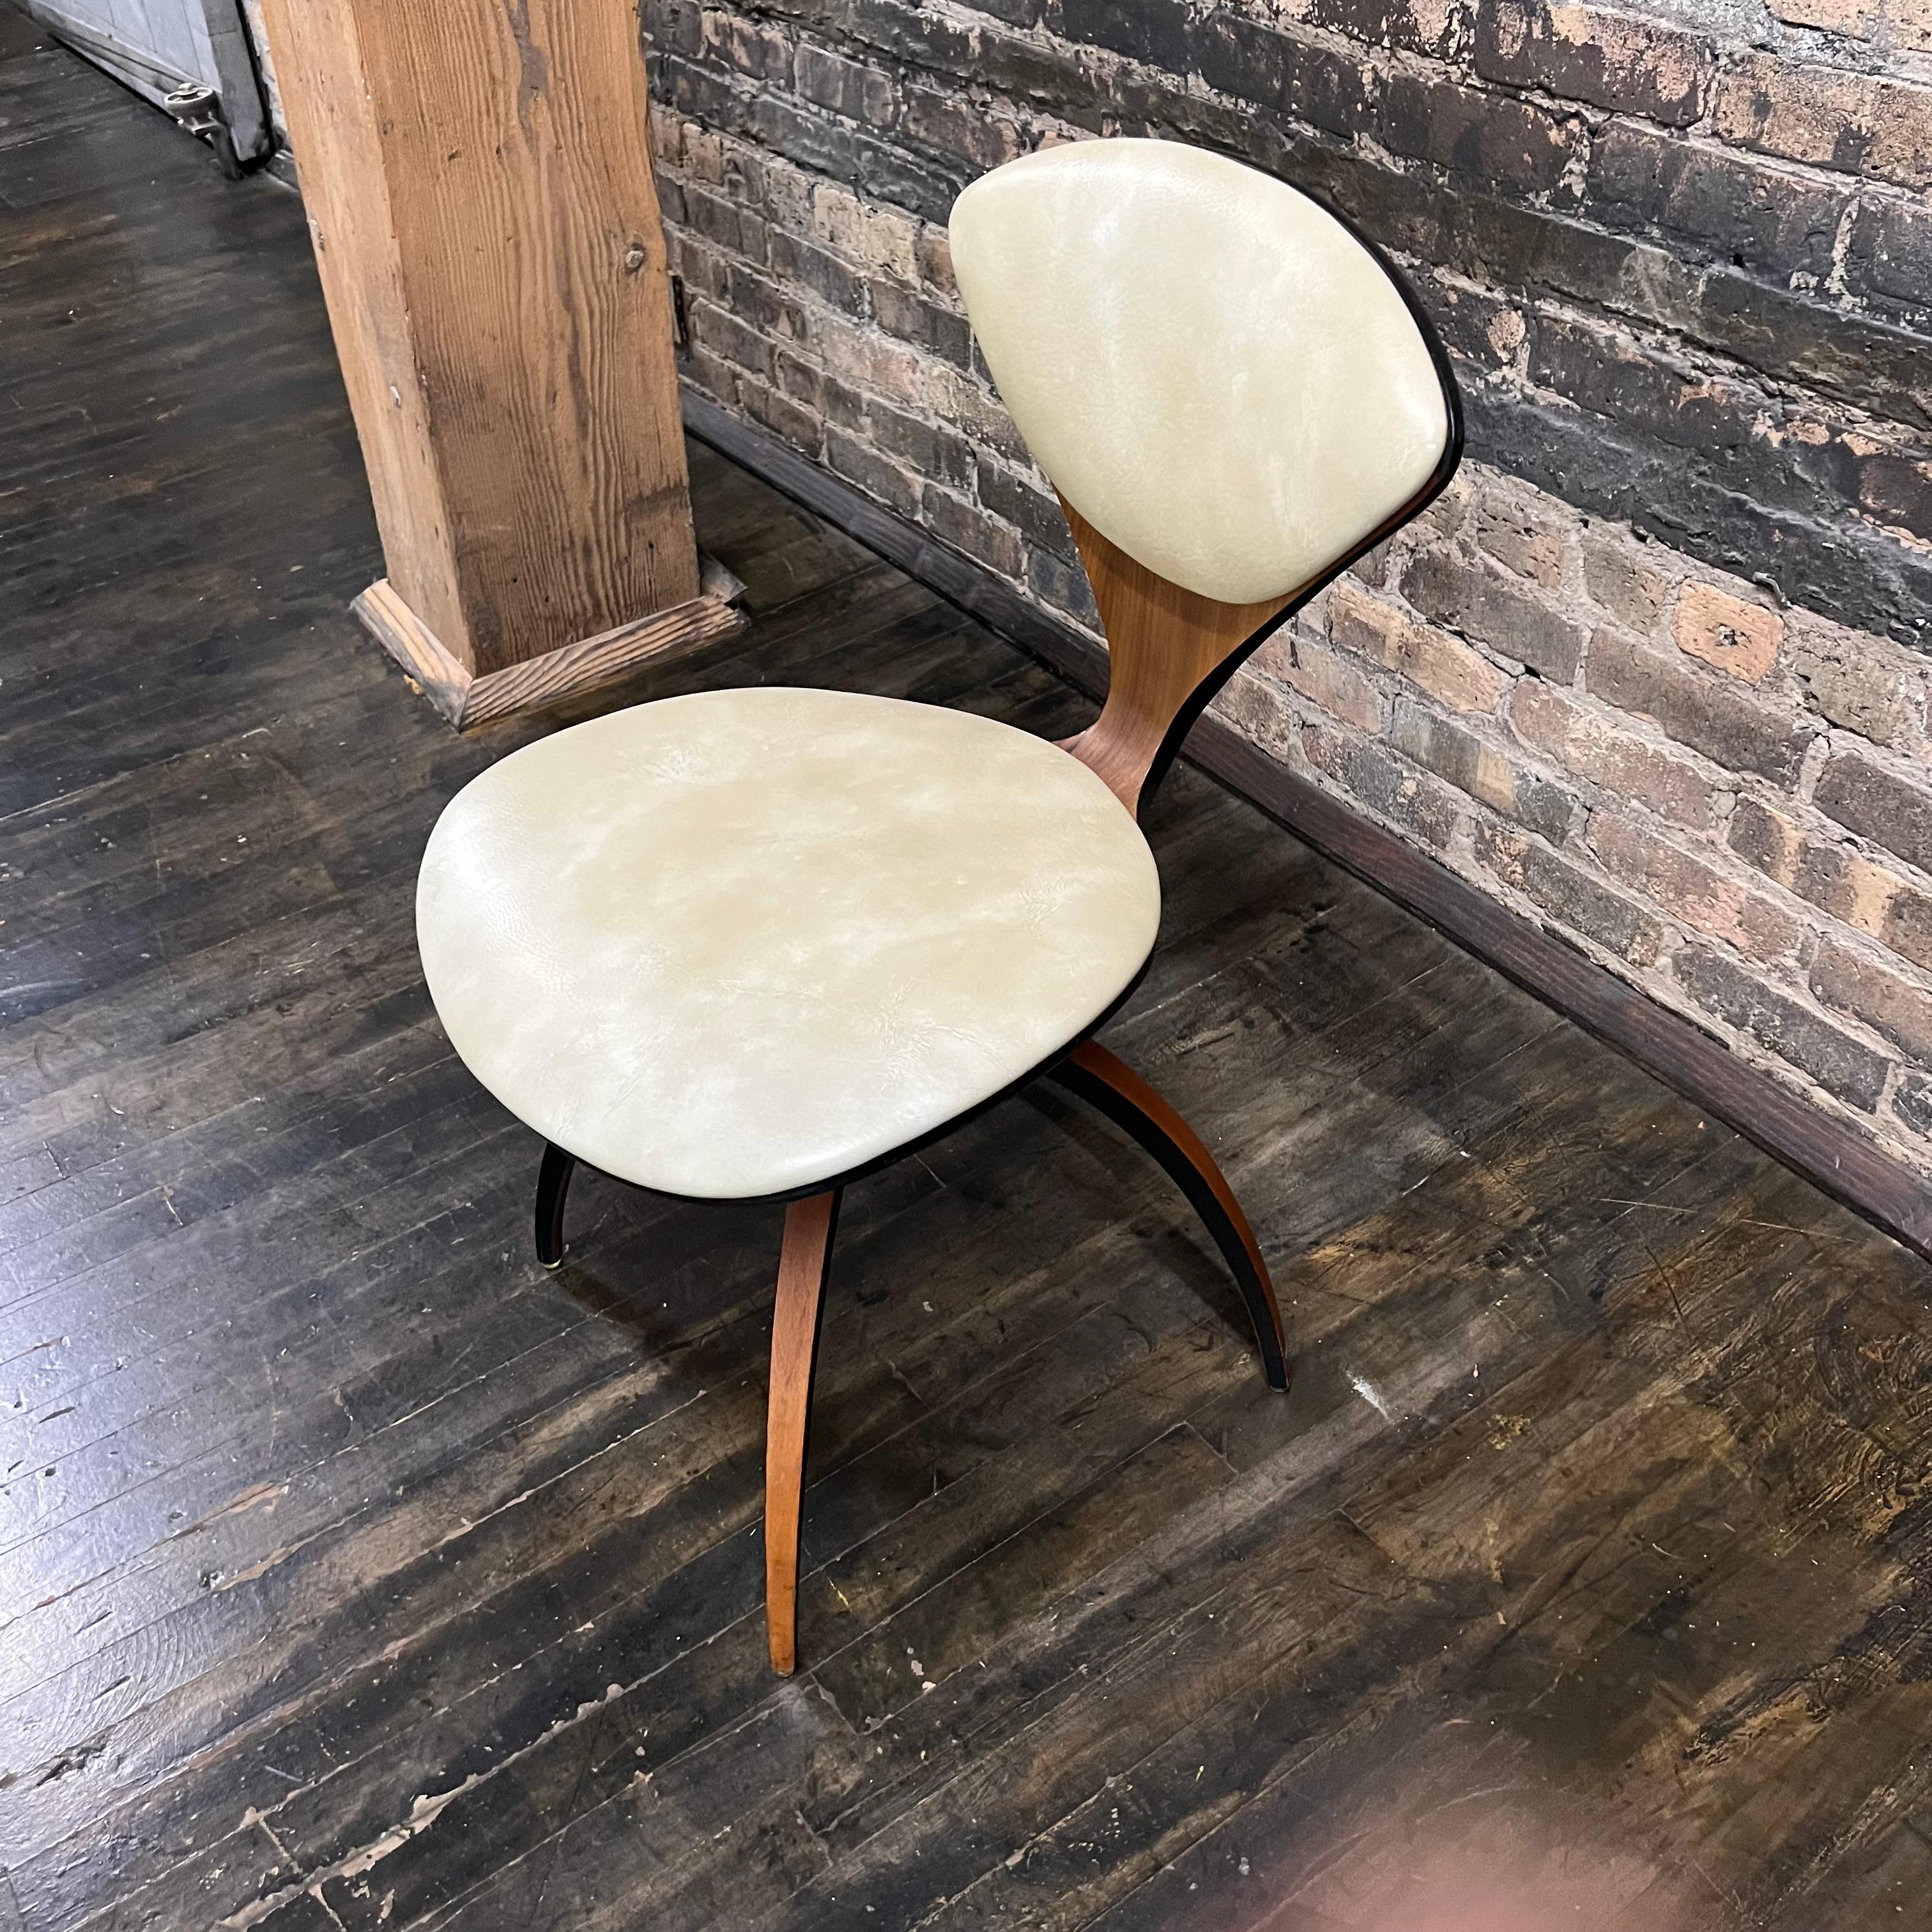 Attention Collectors! This architecturally captivating swivel chair designed by the acclaimed Norman Cherner is ideal for those searching for authentic Plycraft pieces from the early 60's. Constructed of walnut intricately bent in fabulous curvy